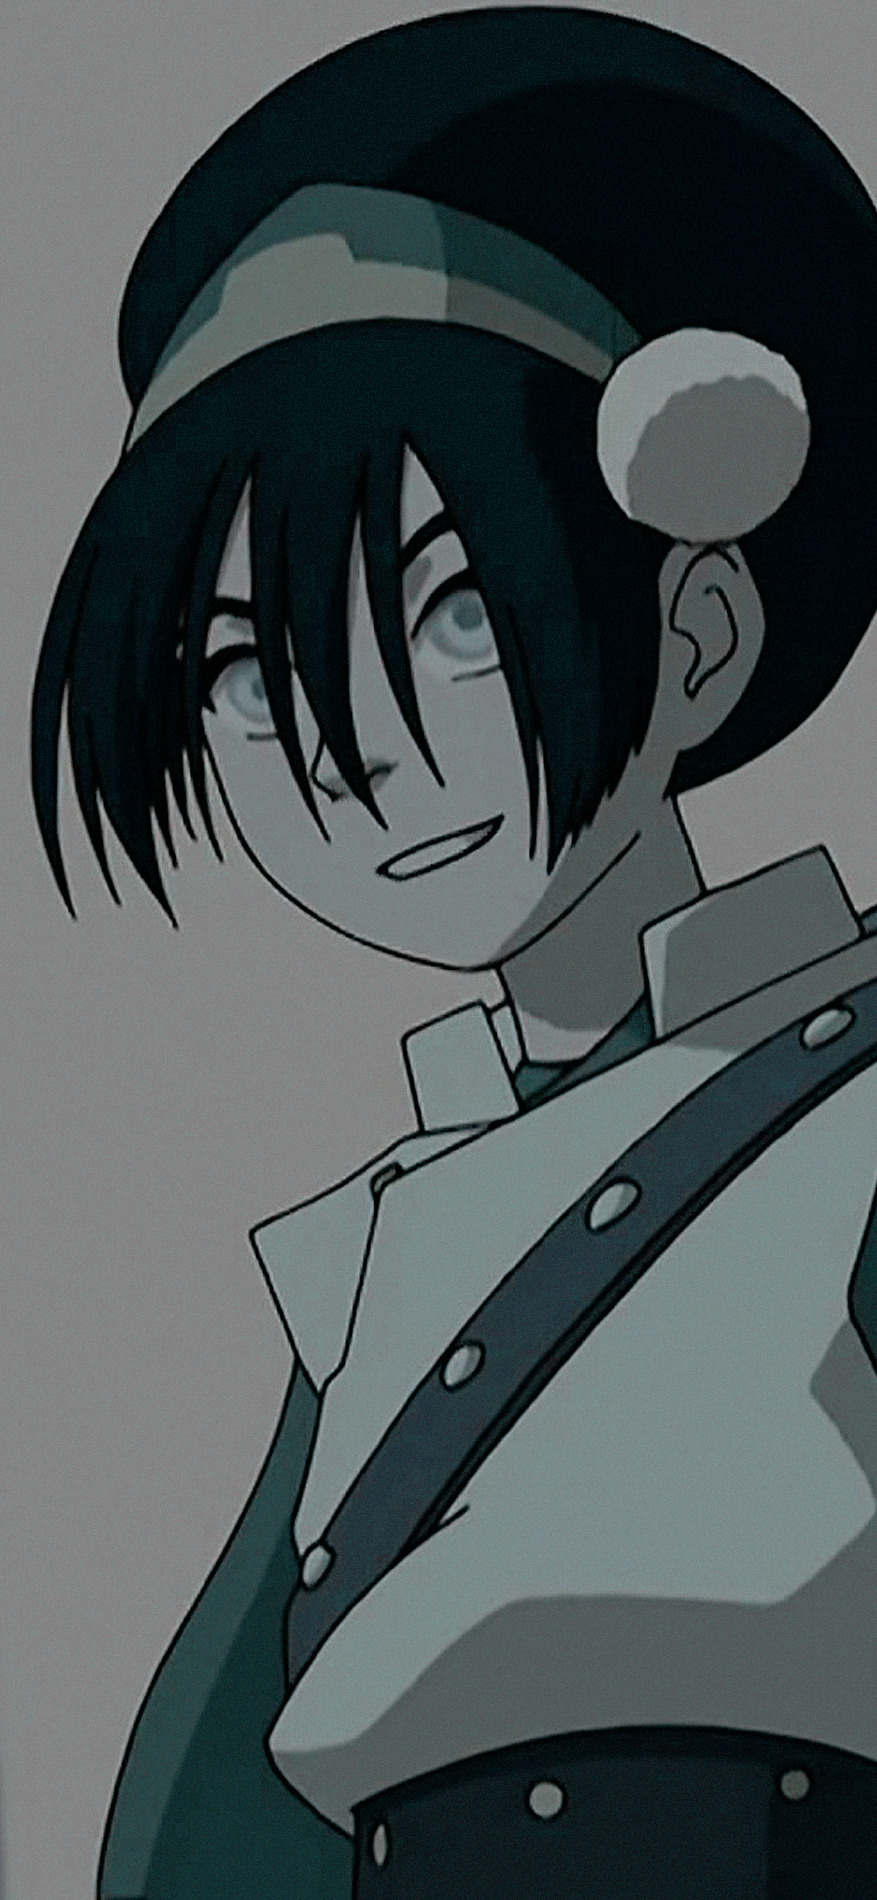 10 Toph Beifong HD Wallpapers and Backgrounds